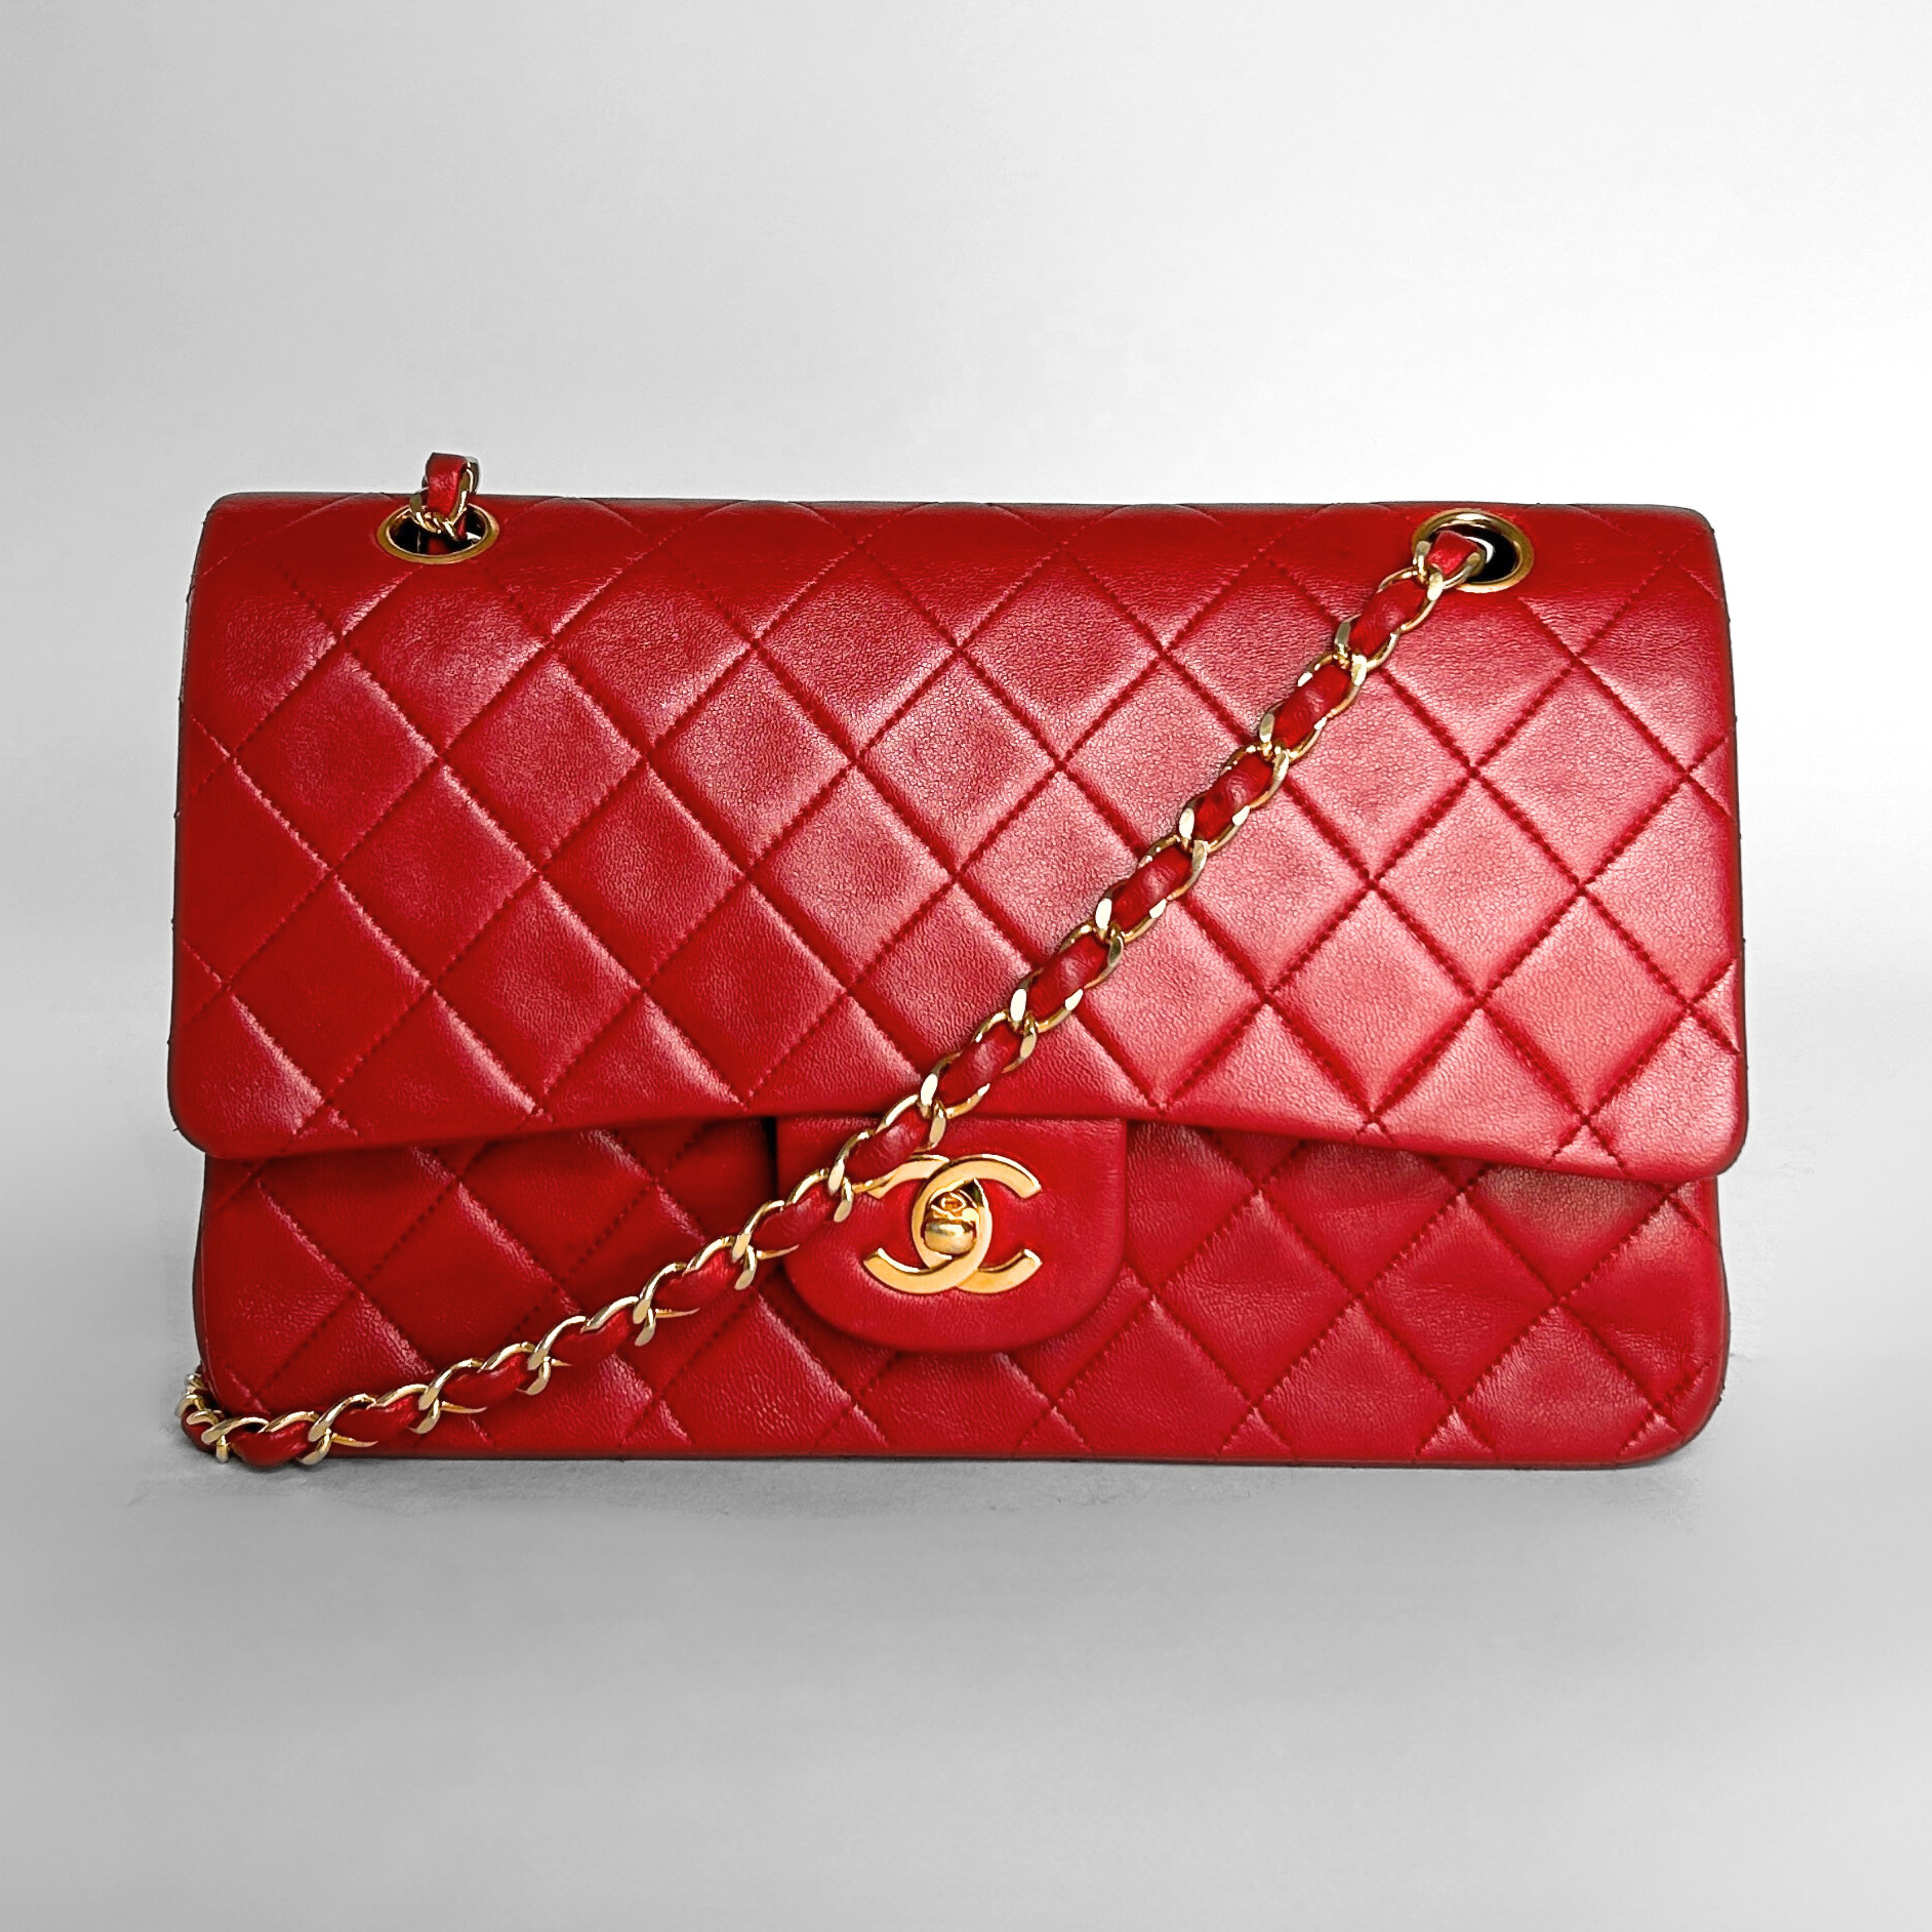 Chanel Red Lambskin Leather Medium Double Flap Bag with Gold, Lot #58009